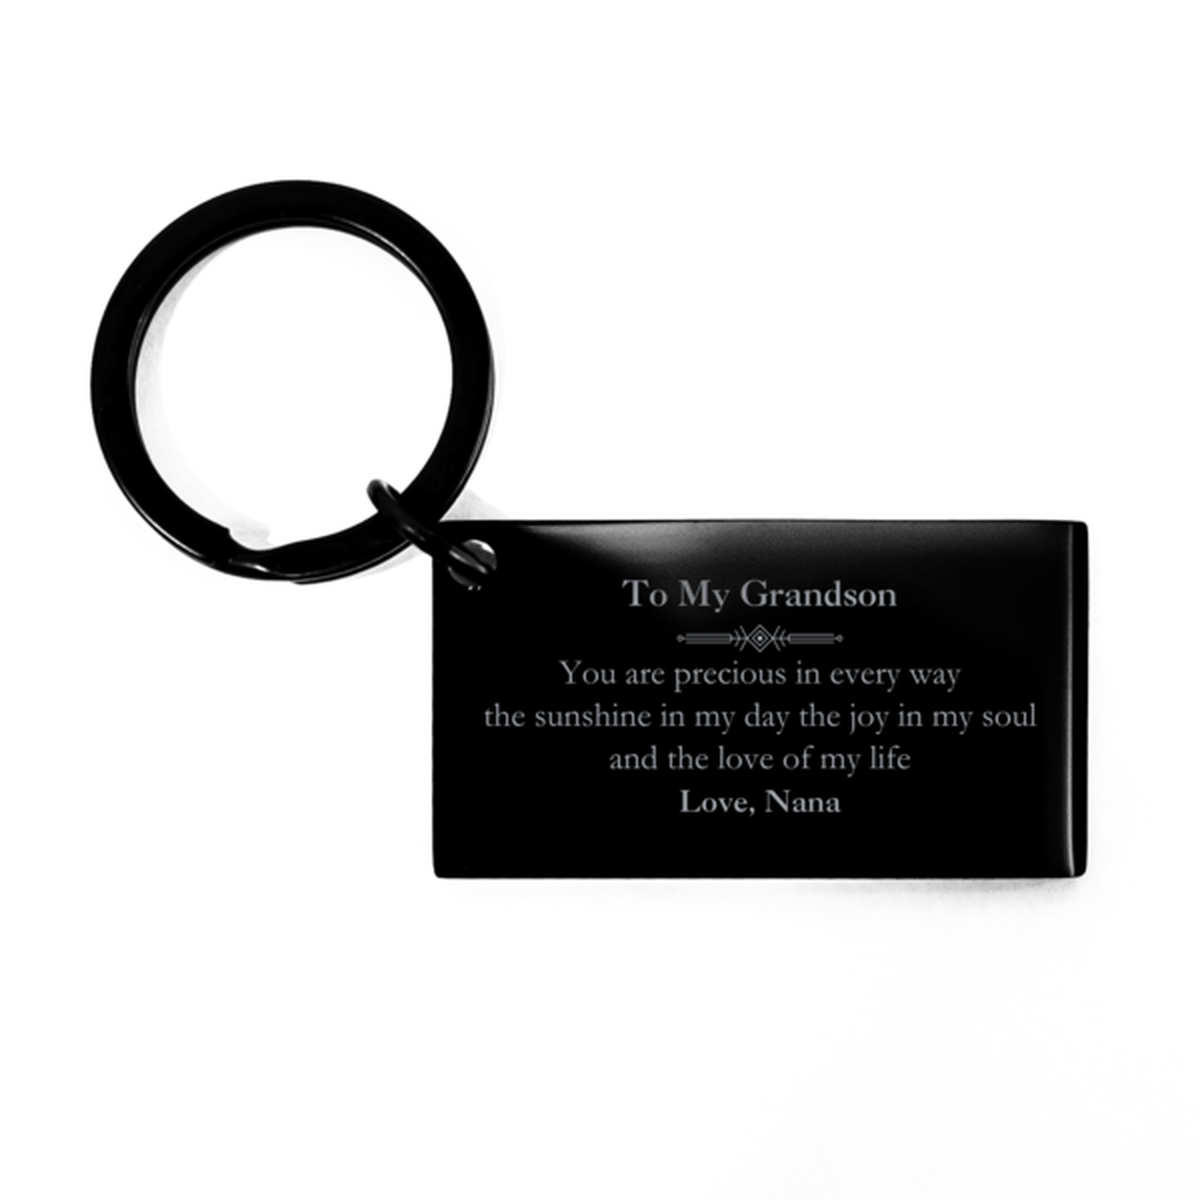 Graduation Gifts for Grandson Keychain Present from Nana, Christmas Grandson Birthday Gifts Grandson You are precious in every way the sunshine in my day. Love, Nana